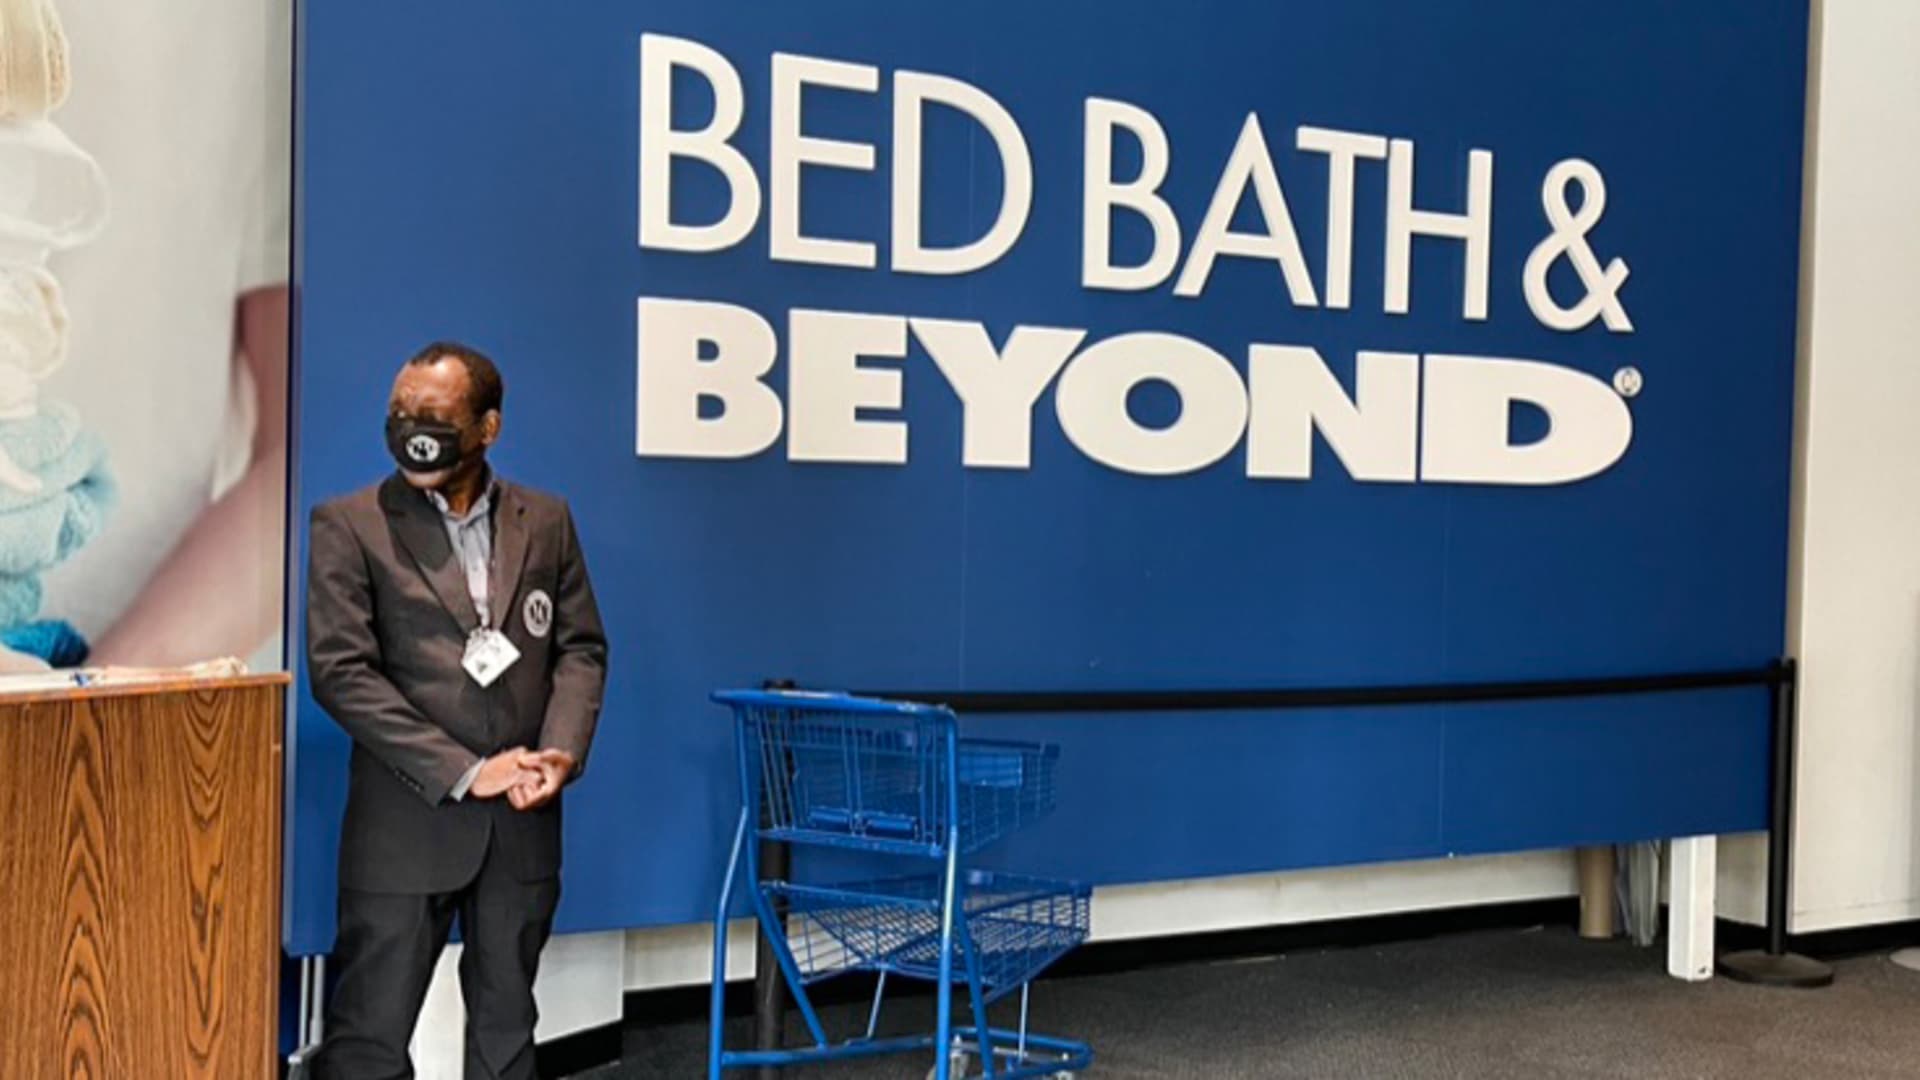 Stocks making the biggest moves premarket: Bed Bath & Beyond, Dropbox, Transocean and more